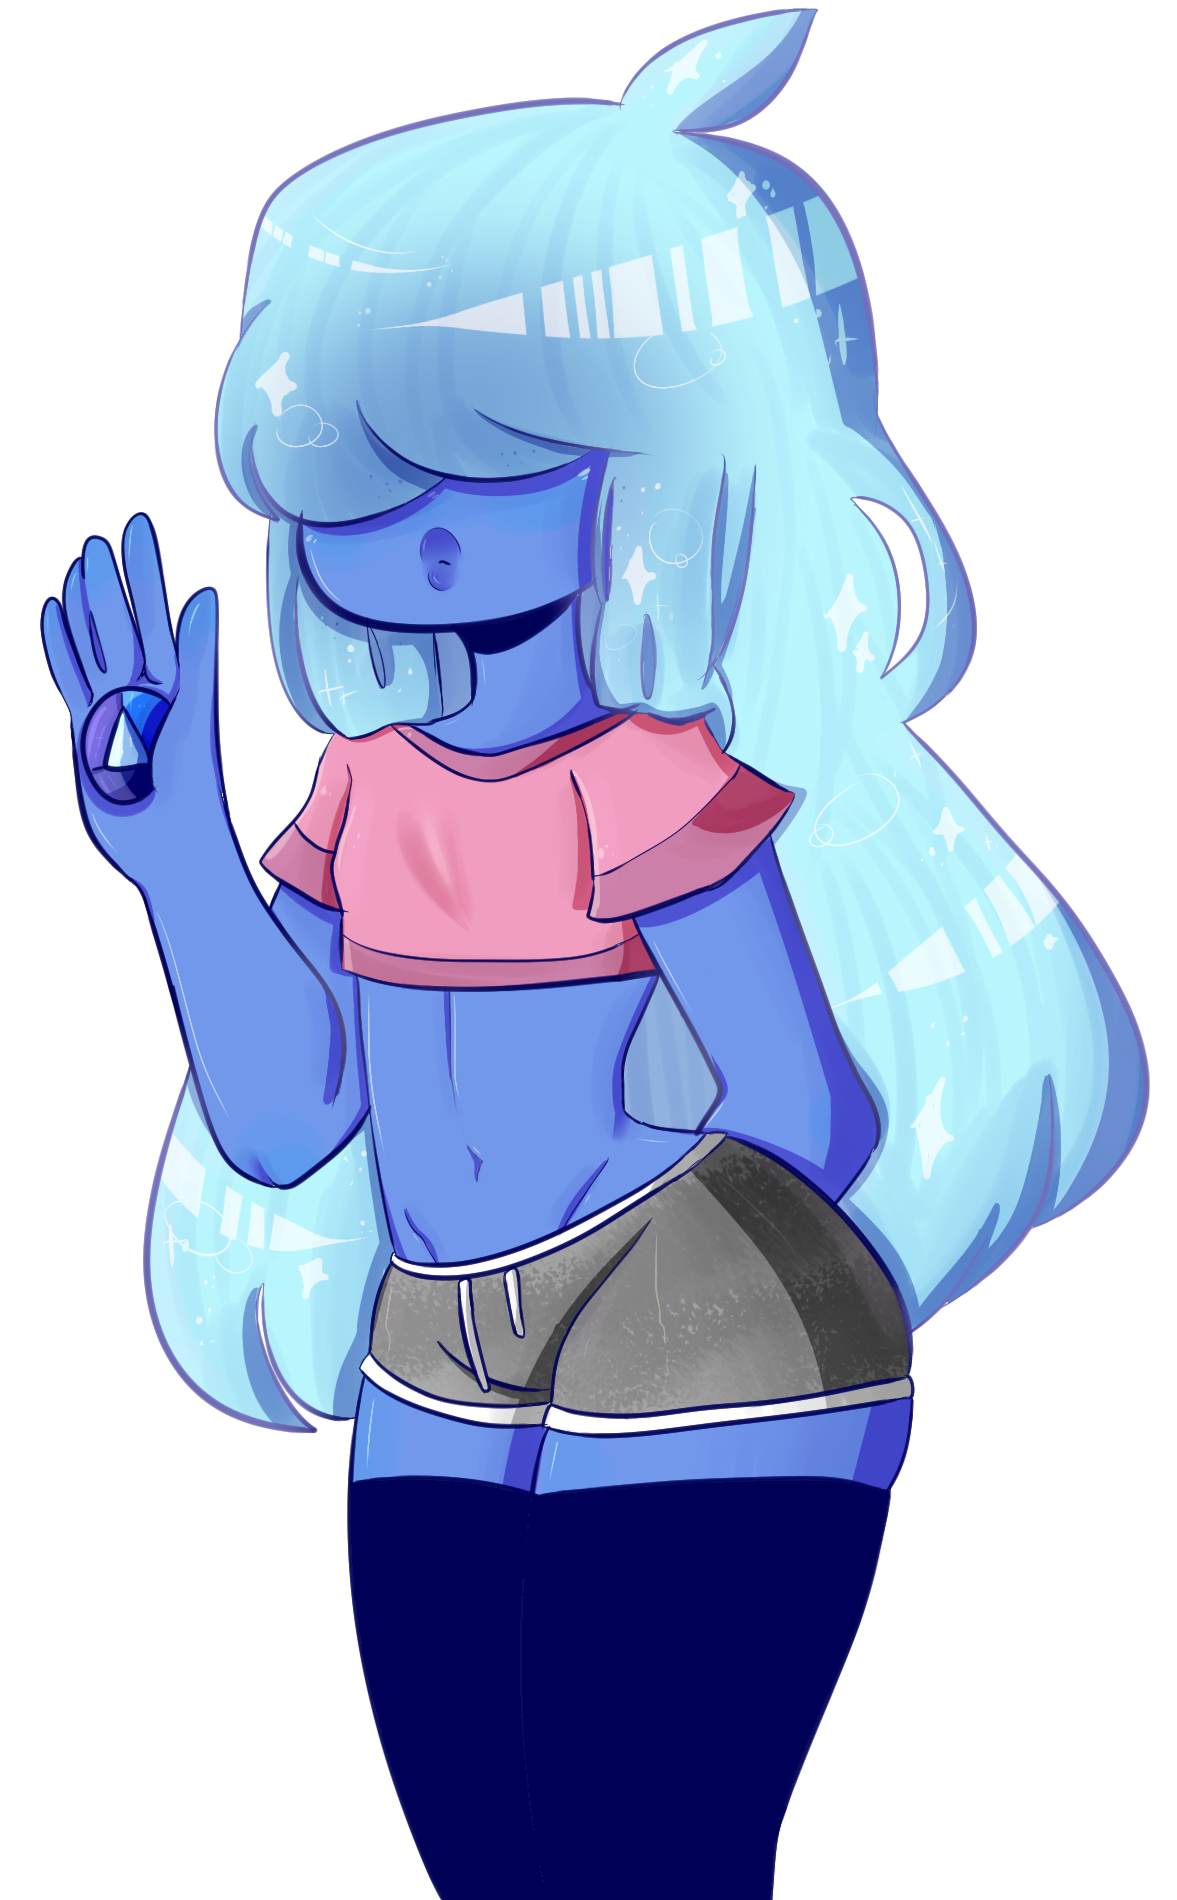 blue girl do not repost without permission